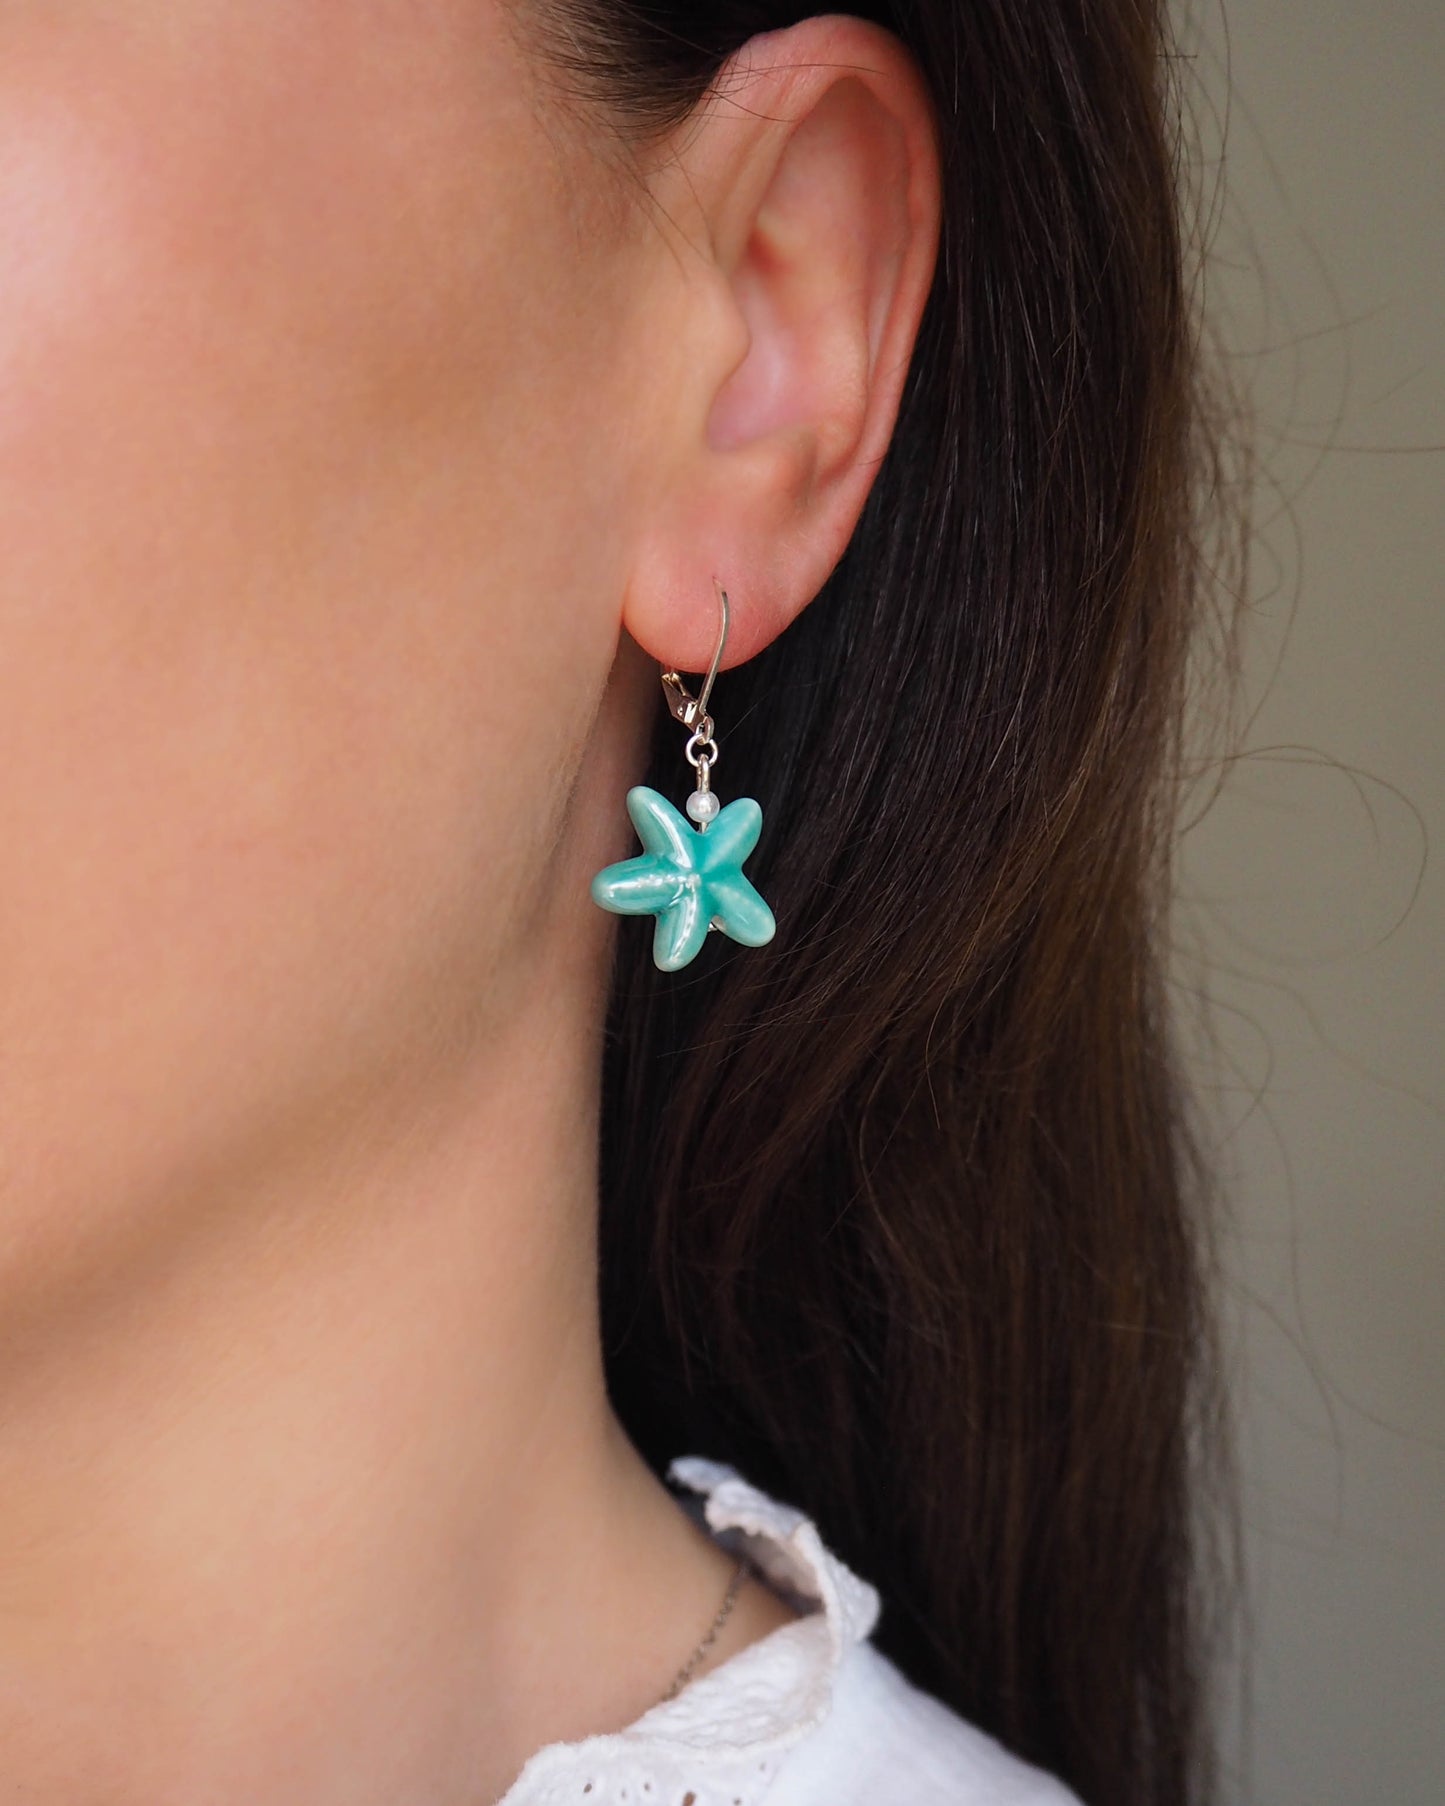 Ceramic Sea Star Earrings, Turquoise Starfish Earrings from Portugal